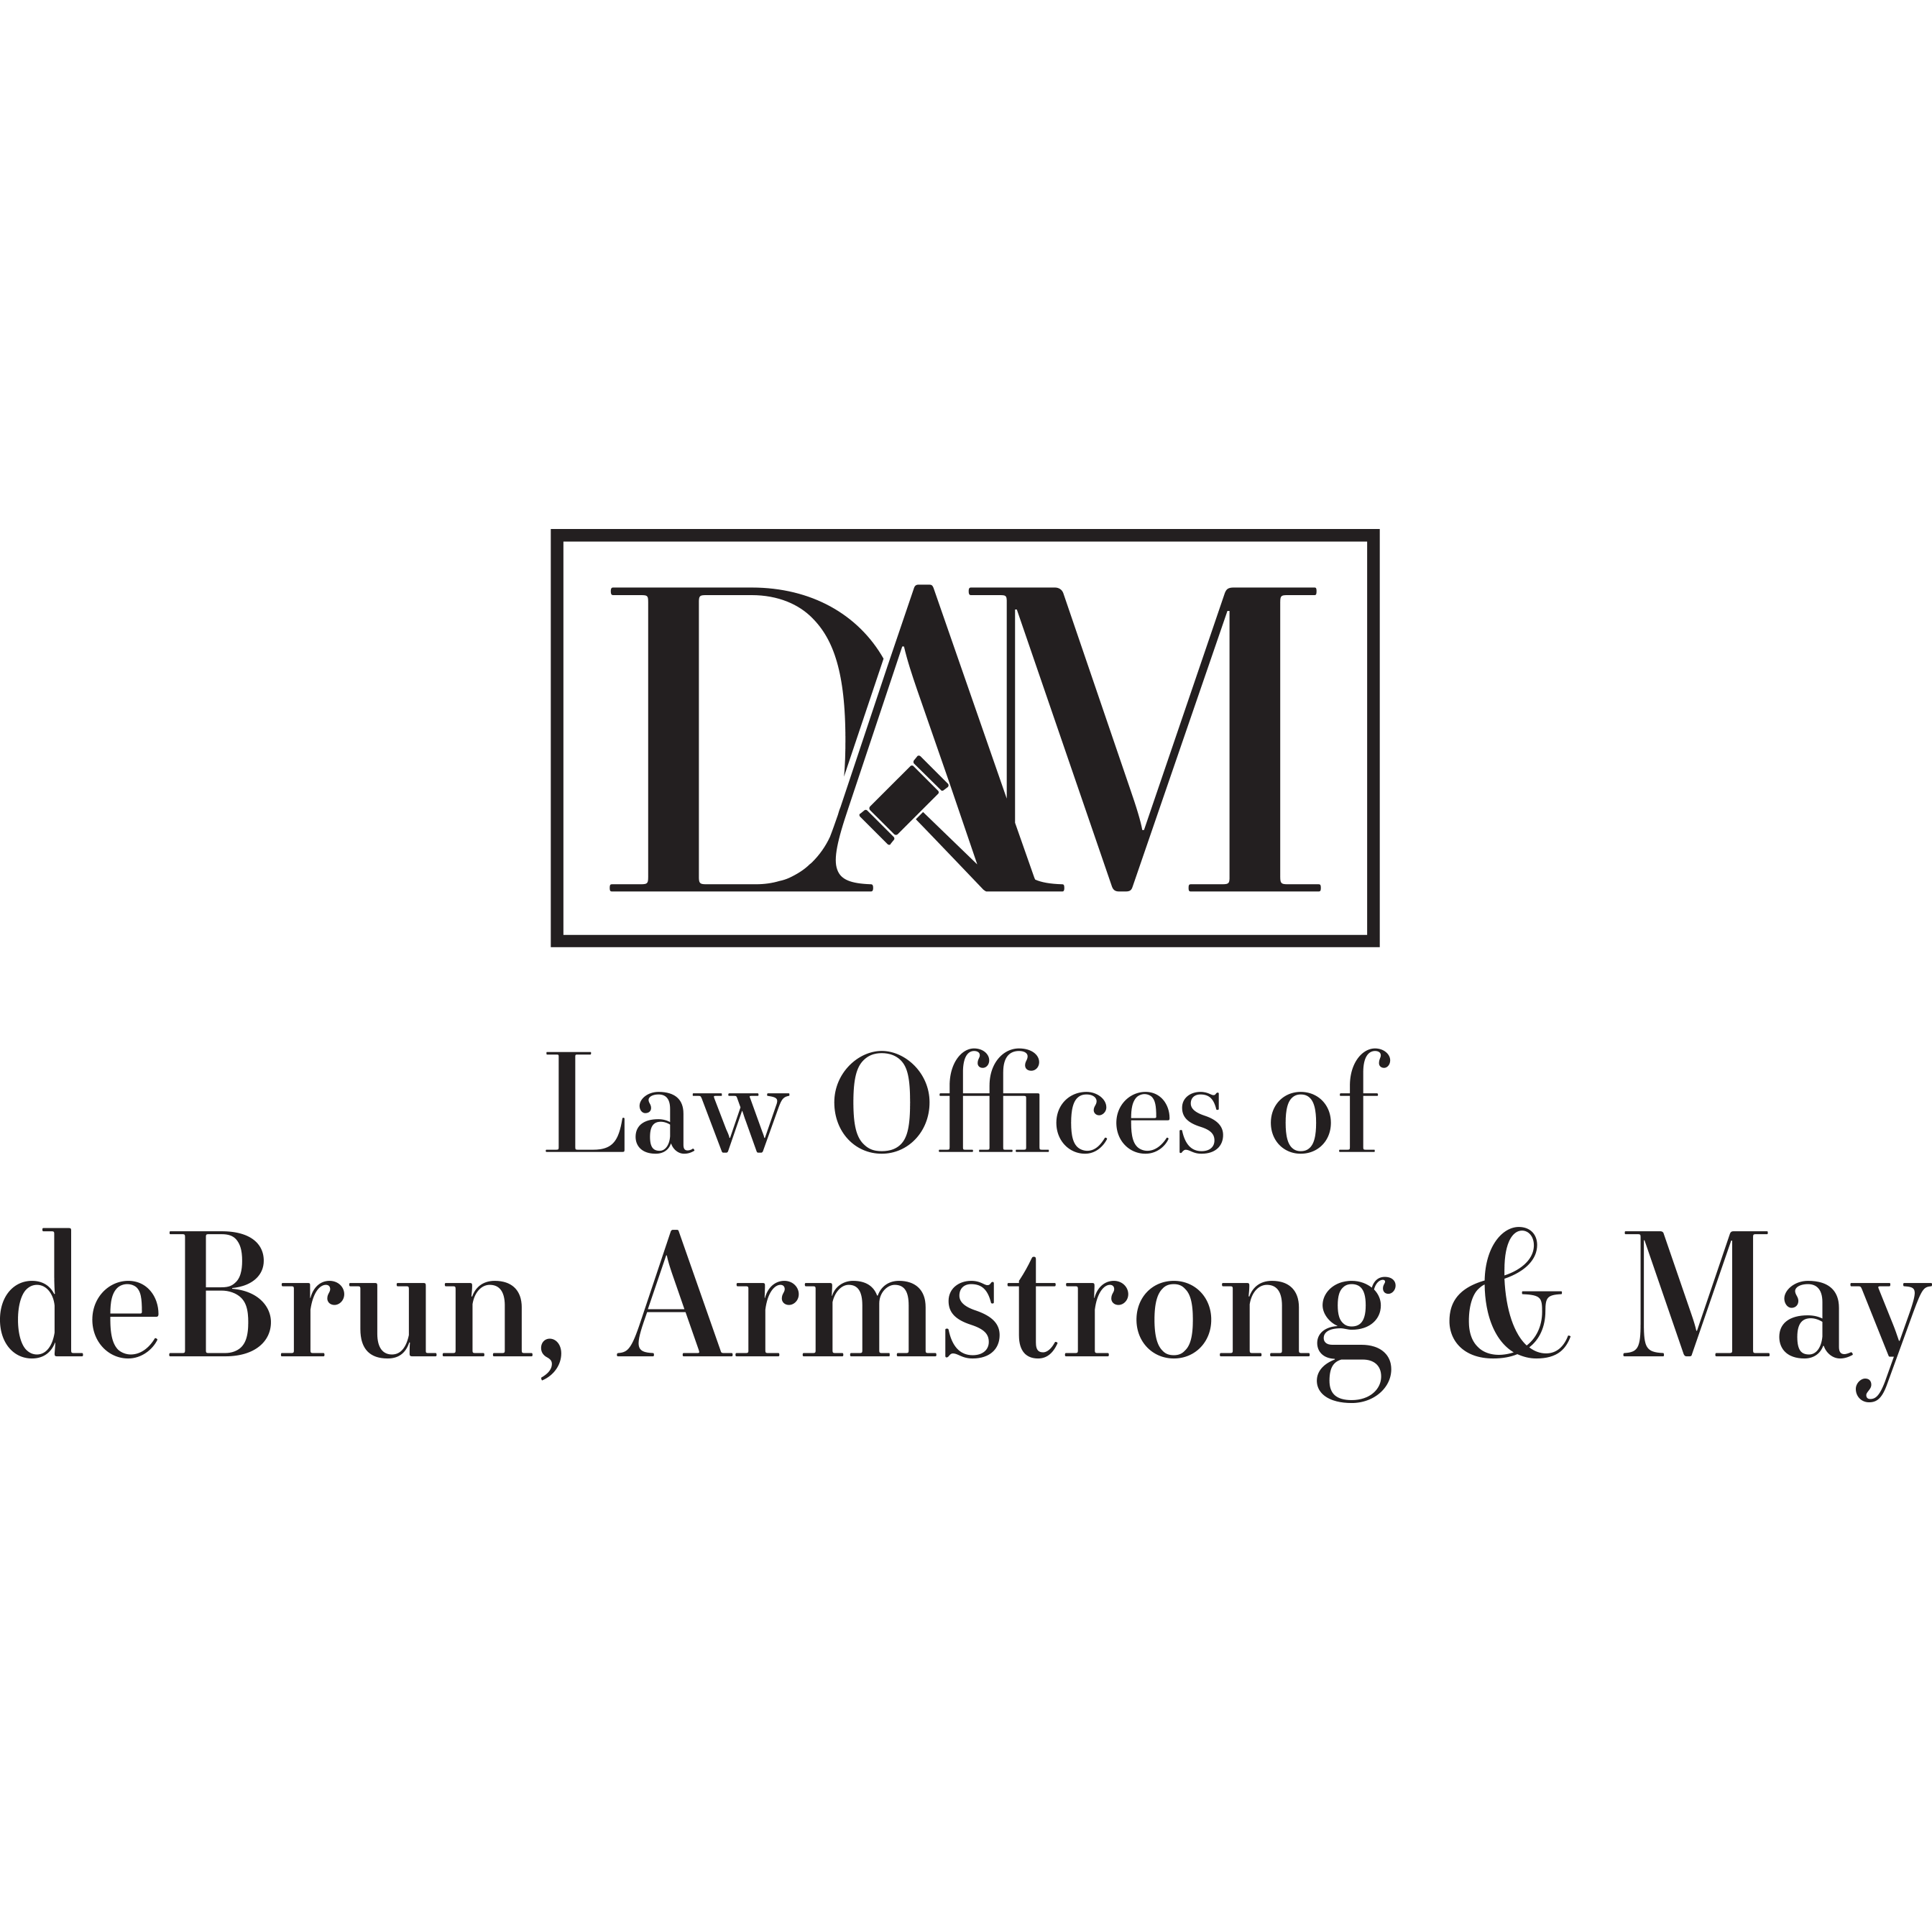 Law Offices of deBrun, Armstrong & May - Charlotte, NC 28204 - (704)405-5505 | ShowMeLocal.com